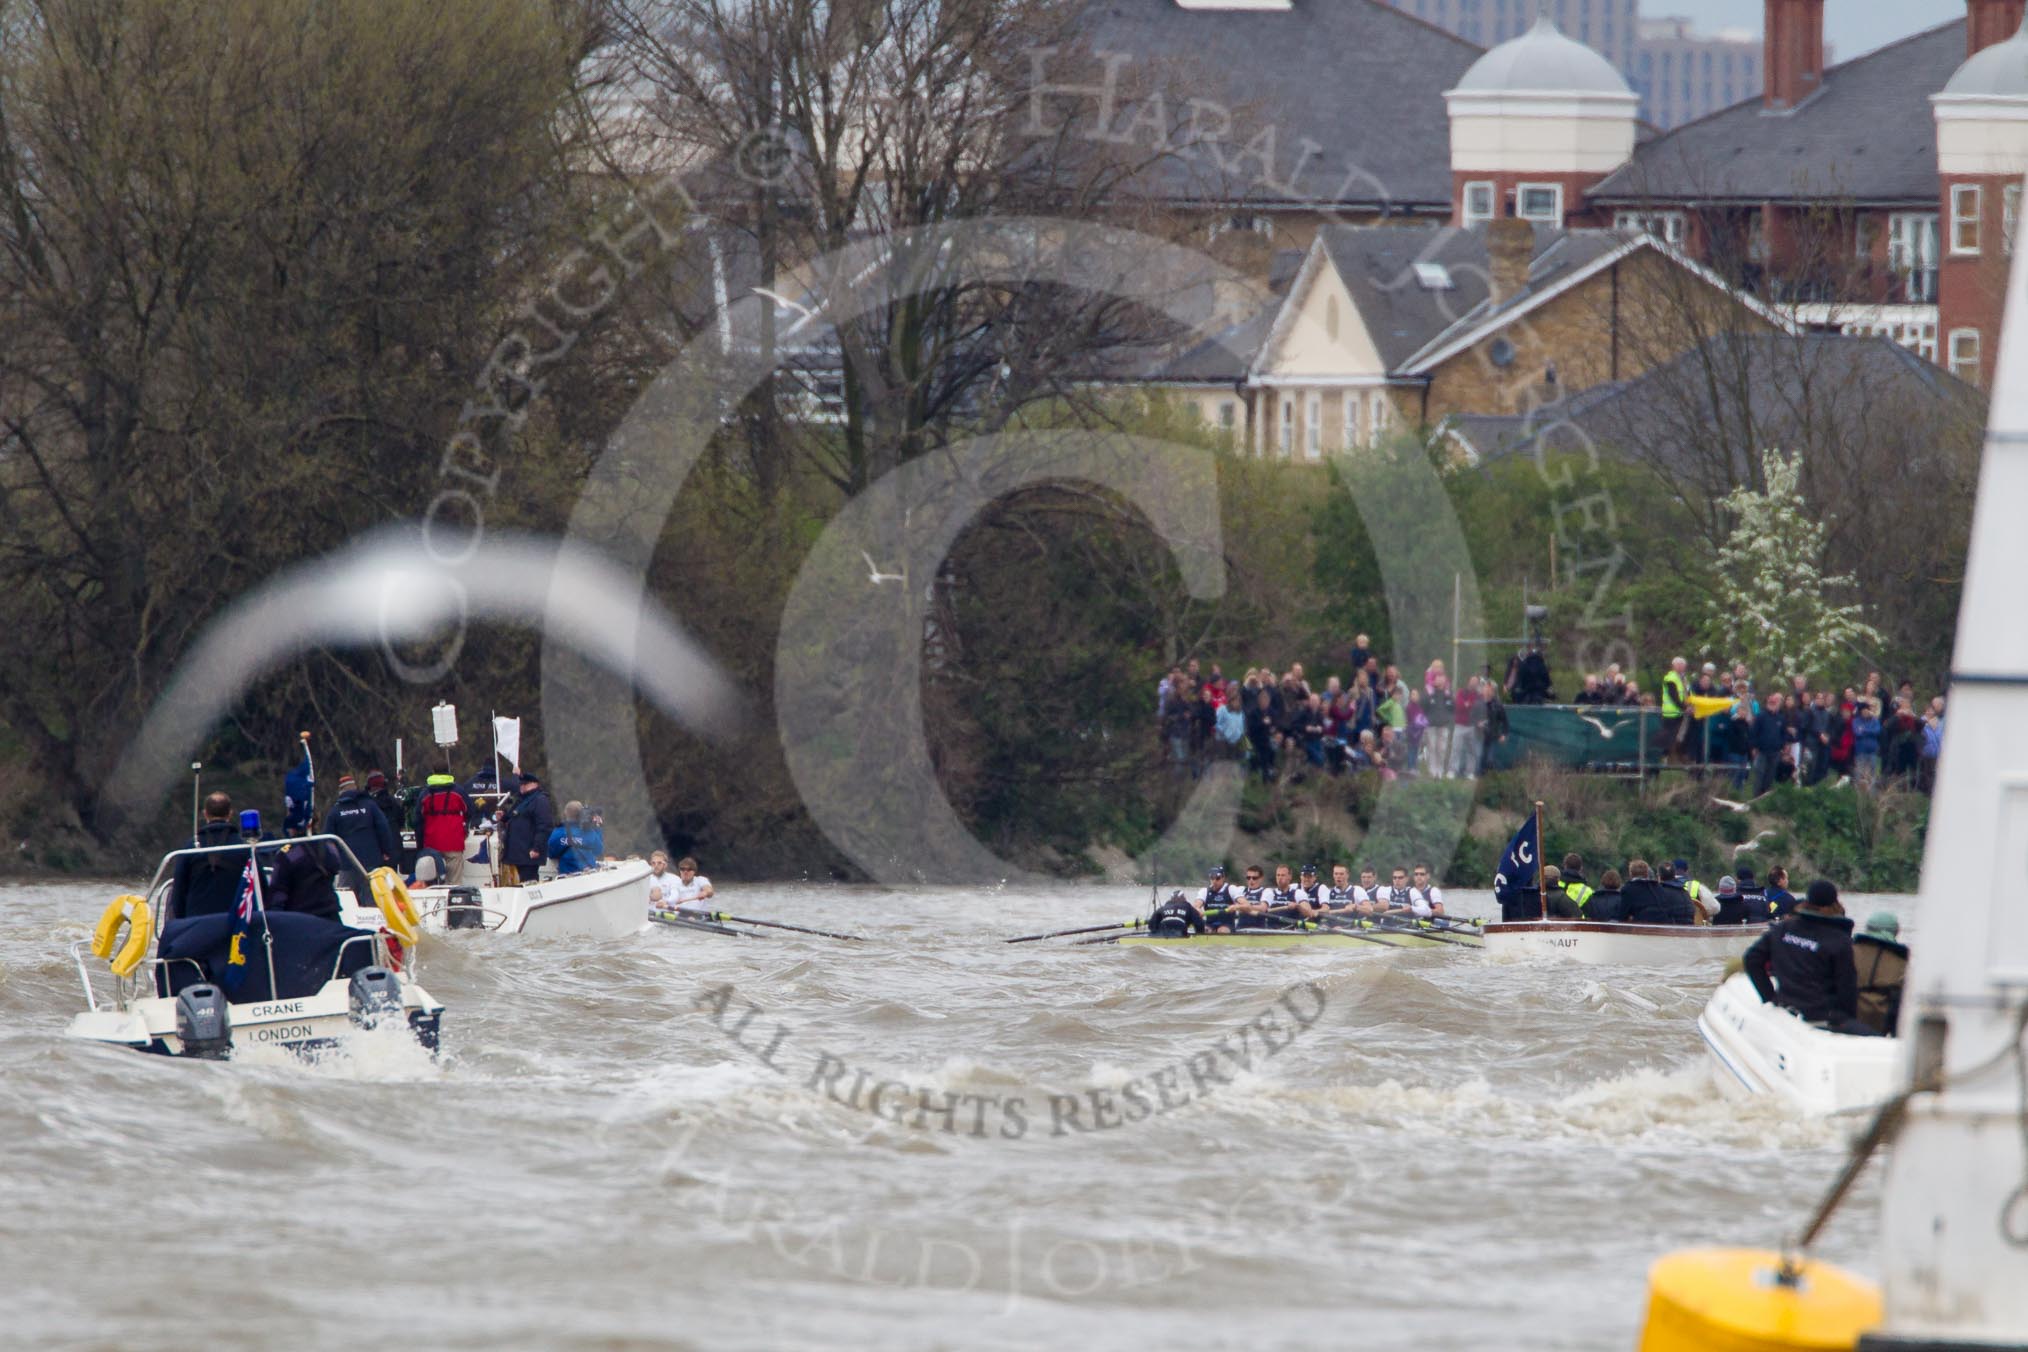 The Boat Race 2012: The 2012 Boat Race, with the boats approaching the Mile Post: The Cambridge Blue Boat on the left, nearly covered by the boat of the umpire, and the Oxford Blue Boat on the right..




on 07 April 2012 at 14:18, image #289